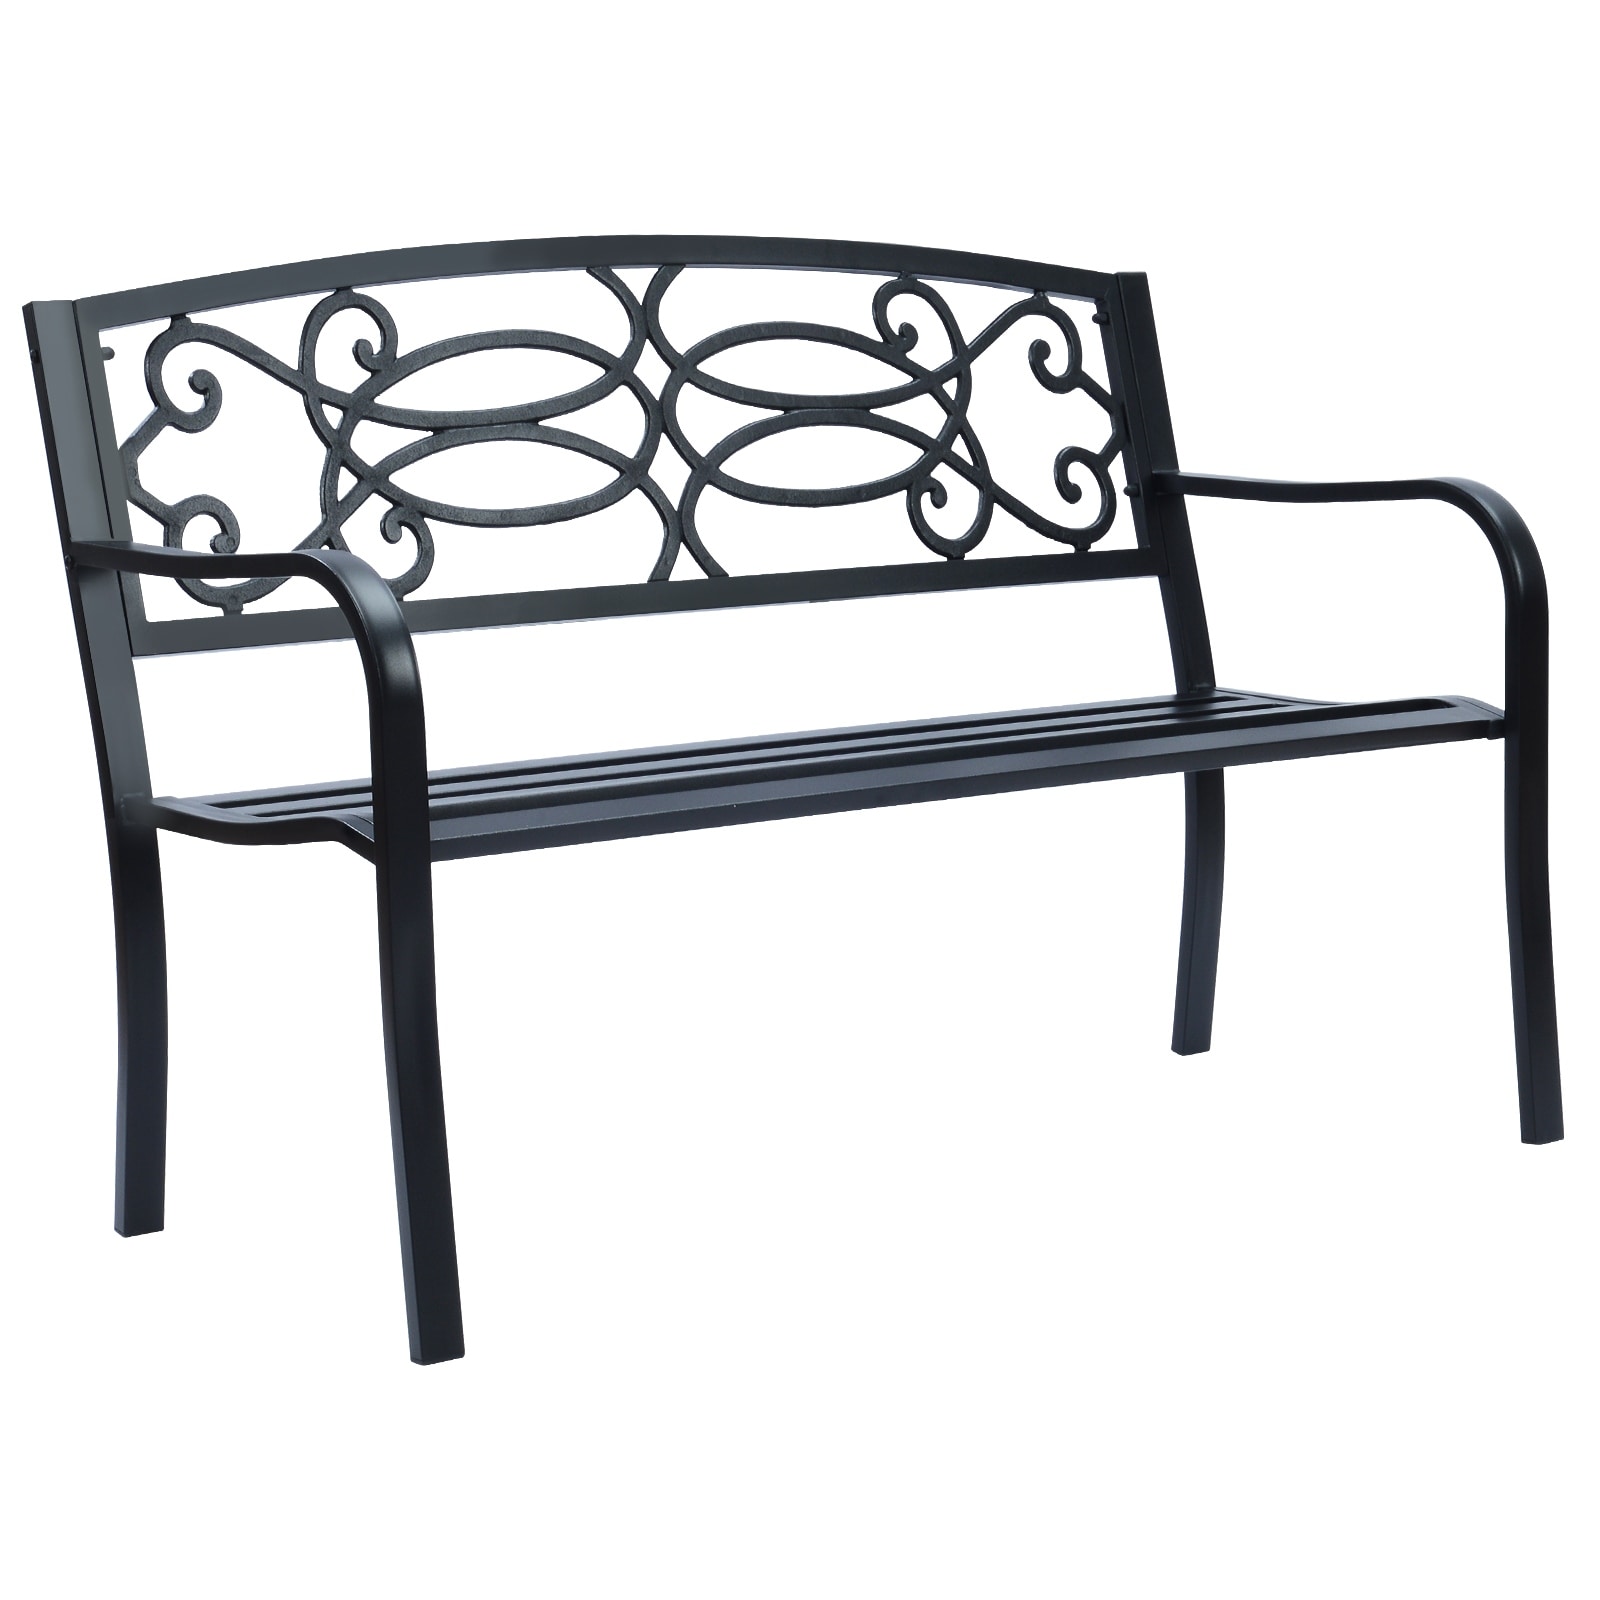 & by - Sun-Ray Sale Lawn, Bench Marion Bench, Garden, - Black Metal Porch, Park 33564601 in Beyond N/A - Patio - for Outdoor Bed On Bath Deck